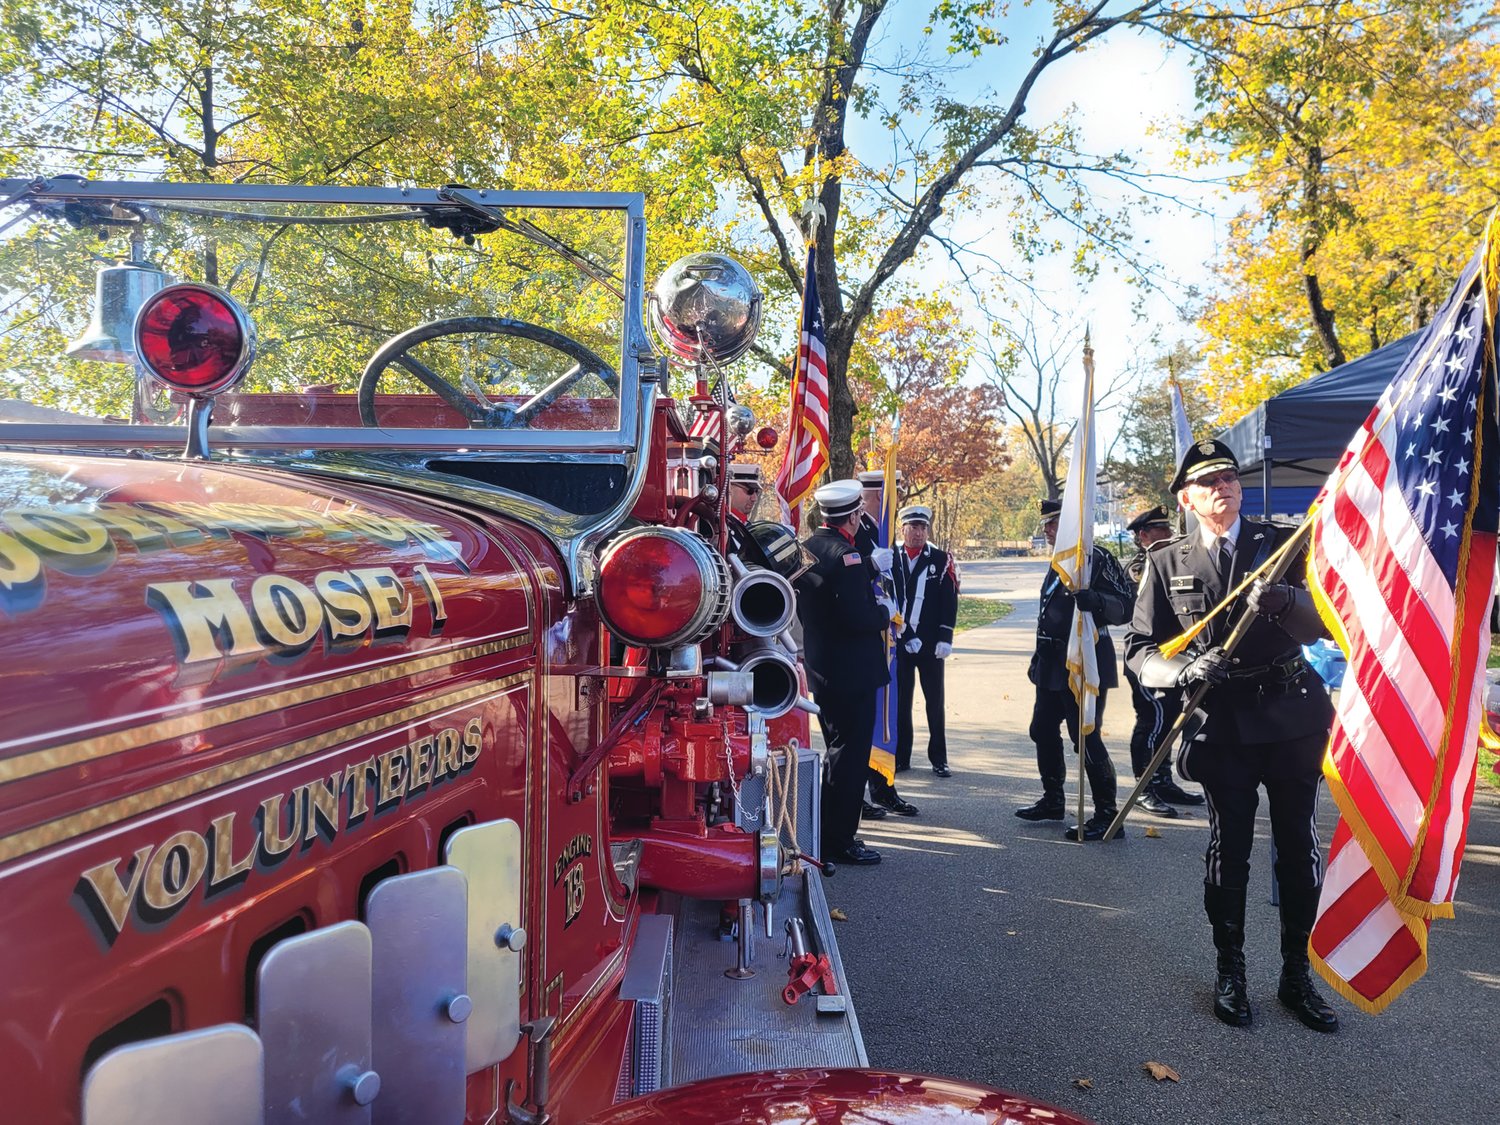 RESTORED MAXIM: The morning’s Honor Guards prepped their flags next to the old Hose No. 1 Maxim fire truck.